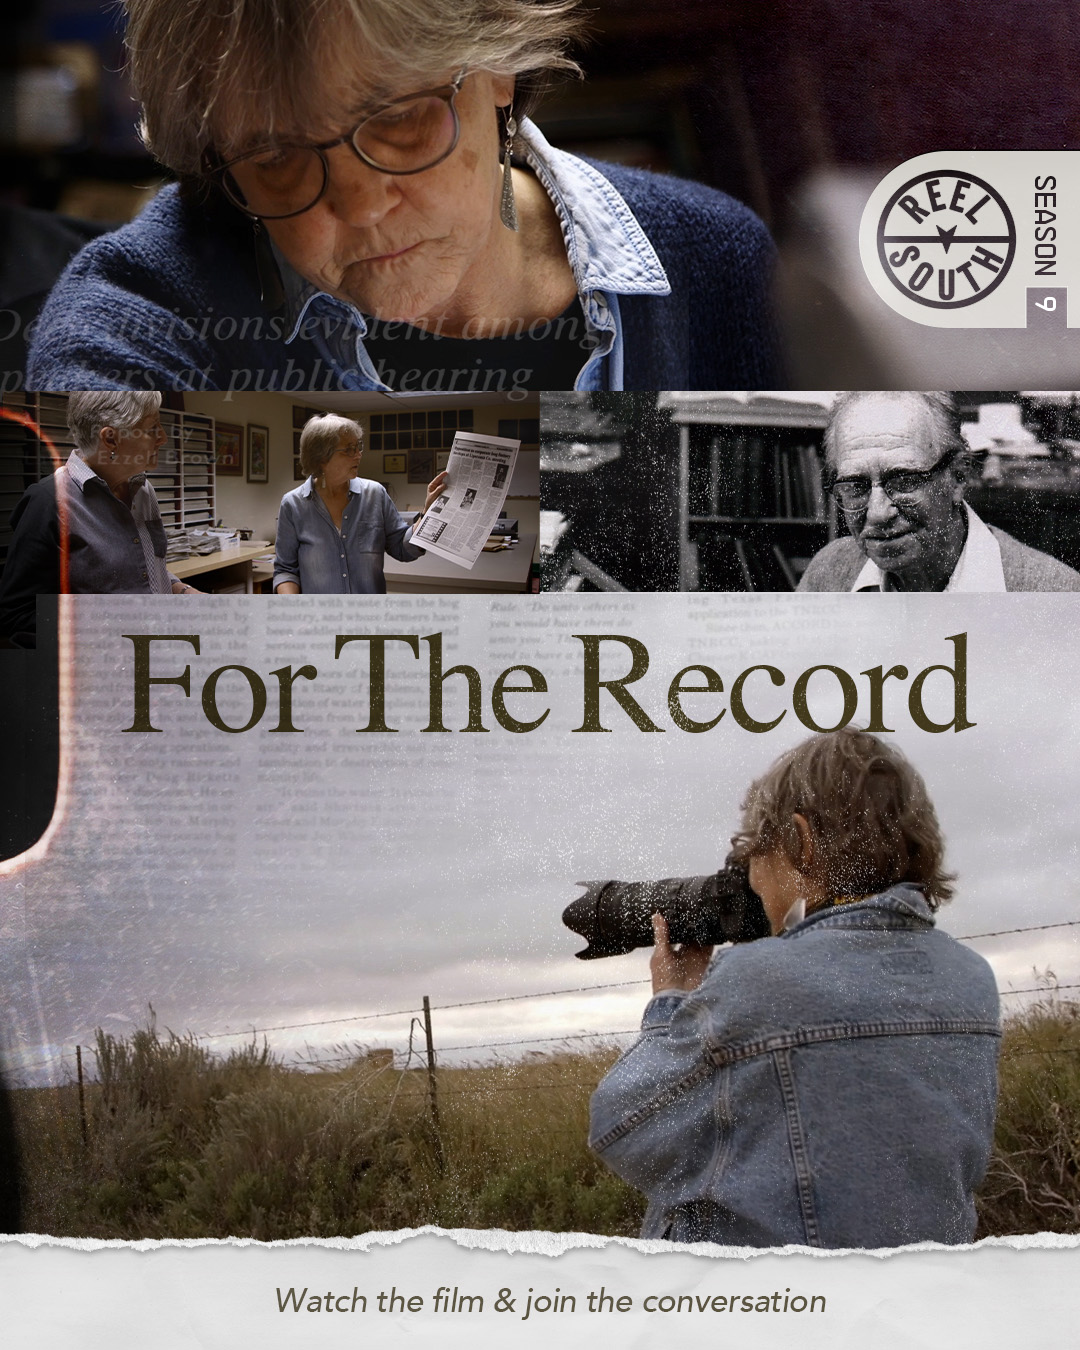 For The Record film by Heather Courtney